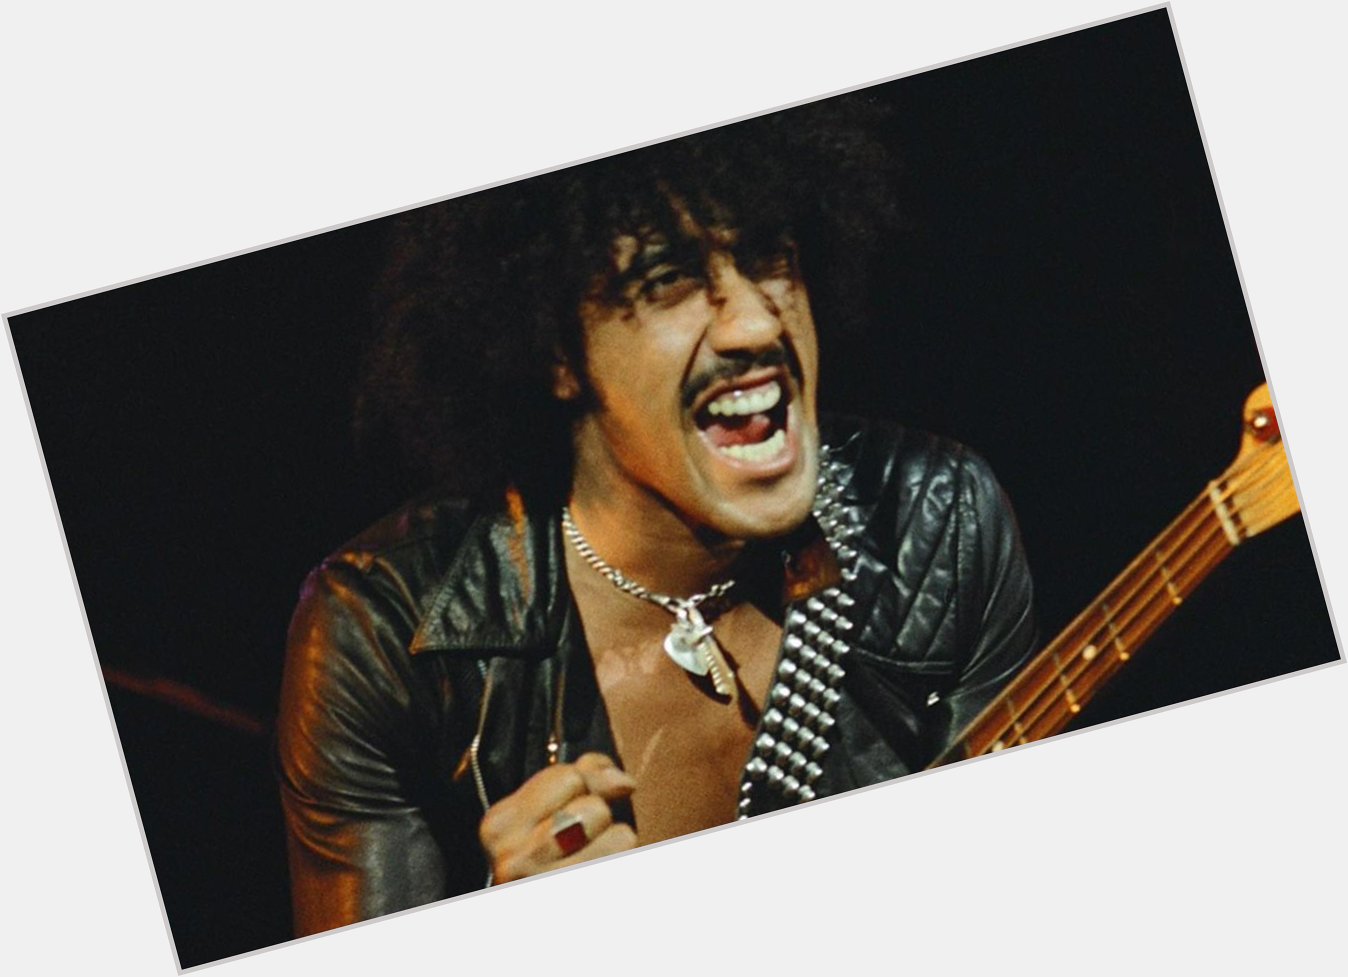 Happy Birthday to Phil Lynott, who would have been 69 today - RIP Rocker.... 